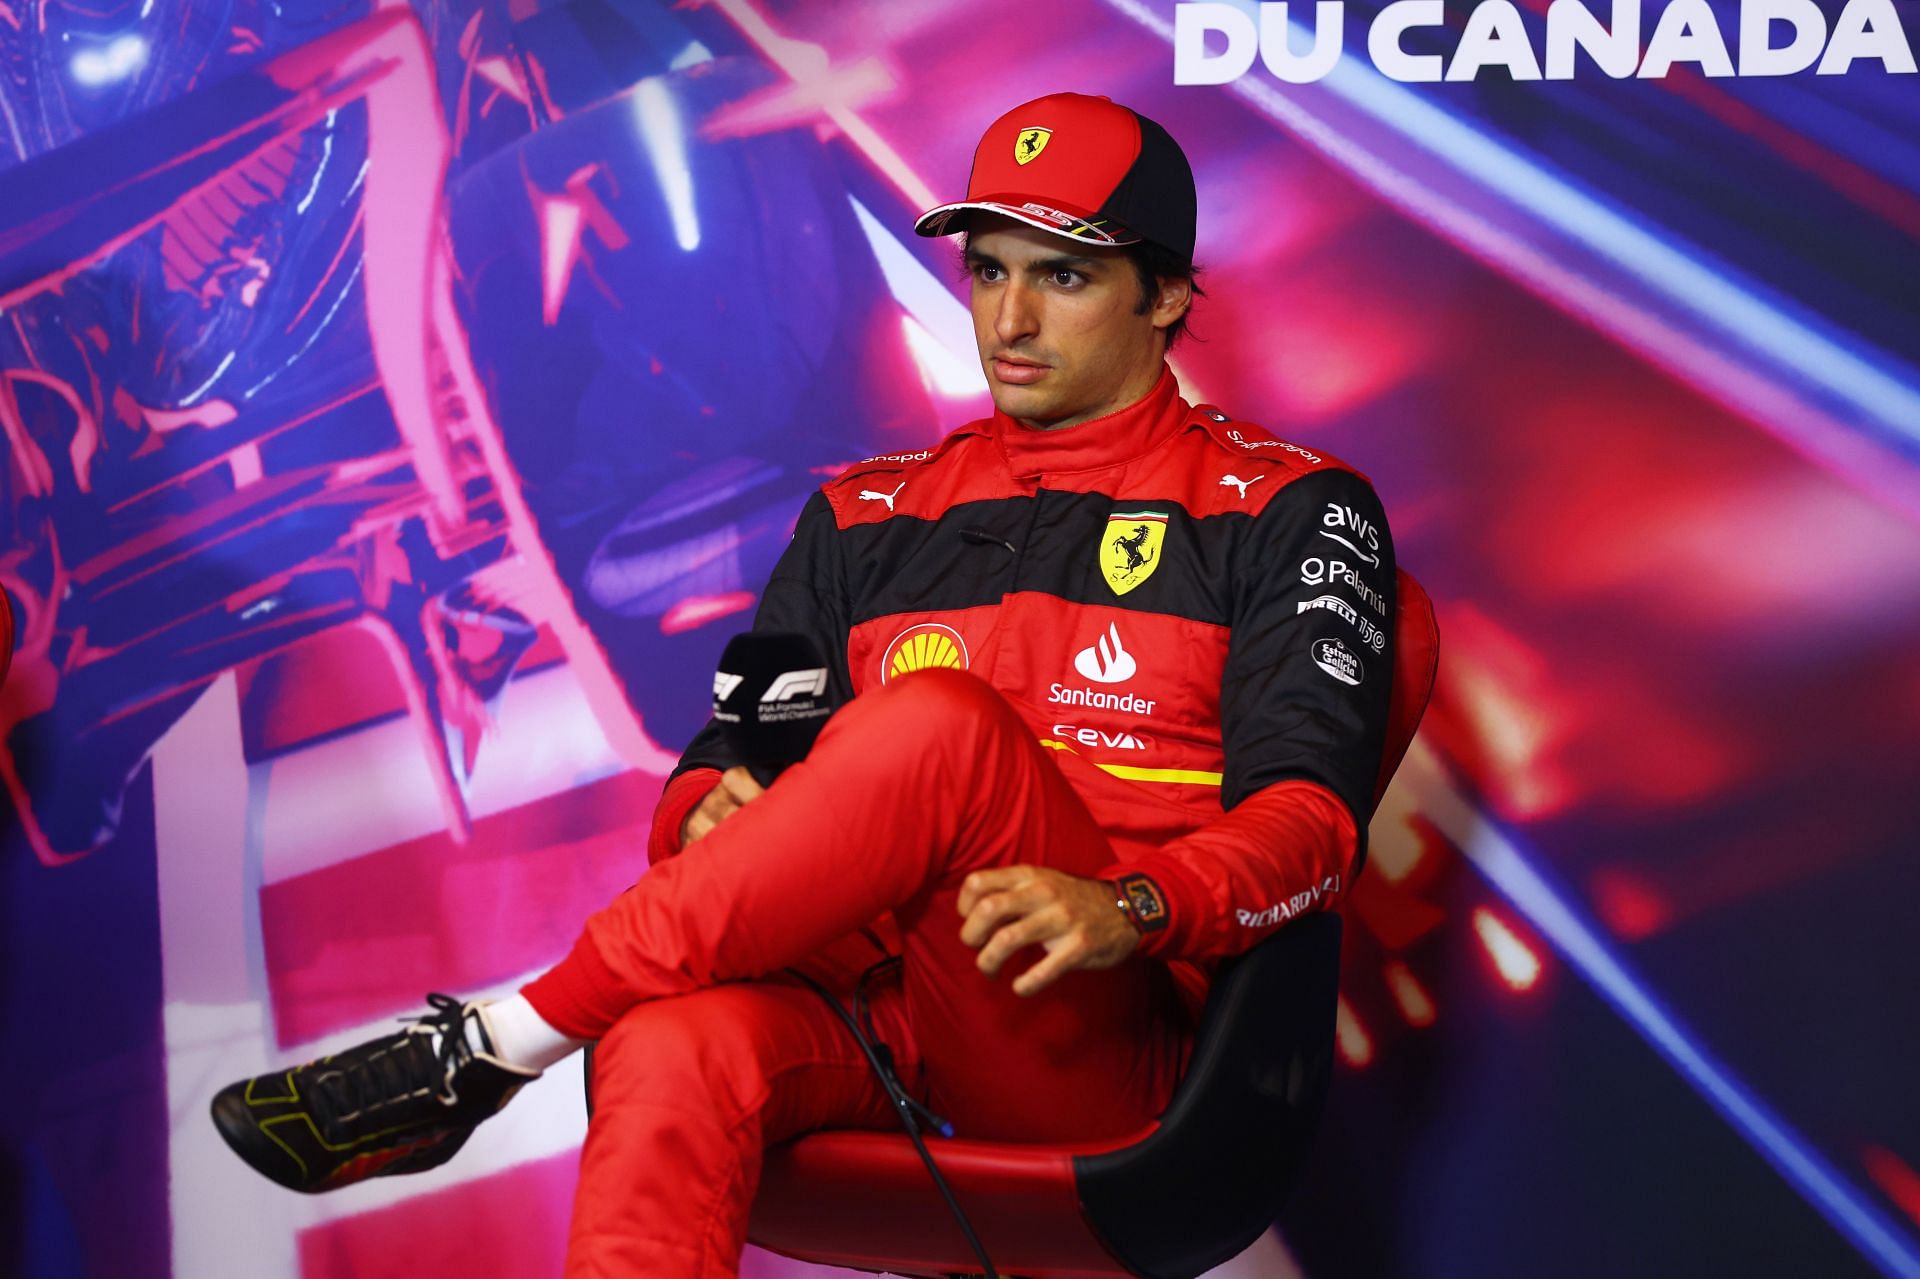 Ferrari driver Carlos Sainz speaks to the media after qualifying in P3 for the 2022 F1 Canadian GP. (Photo by Lars Baron/Getty Images)